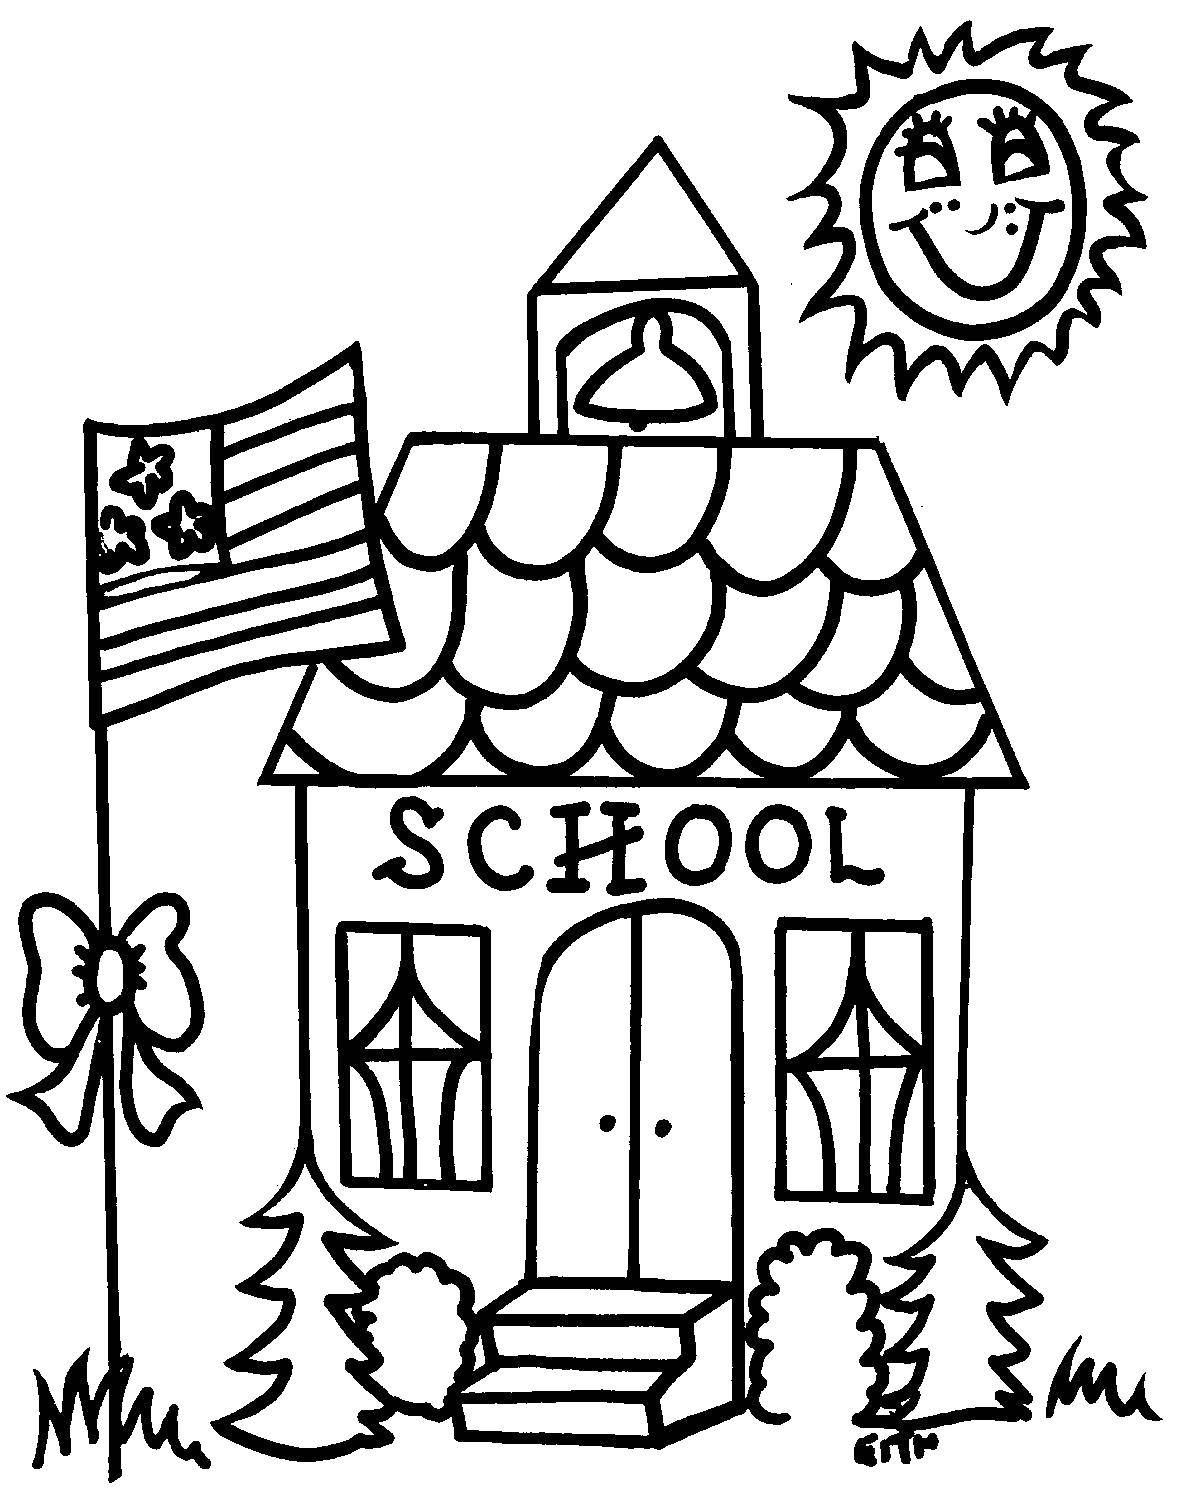 Coloring Sunday school. Category Coloring house. Tags:  home, school, Sunday school.